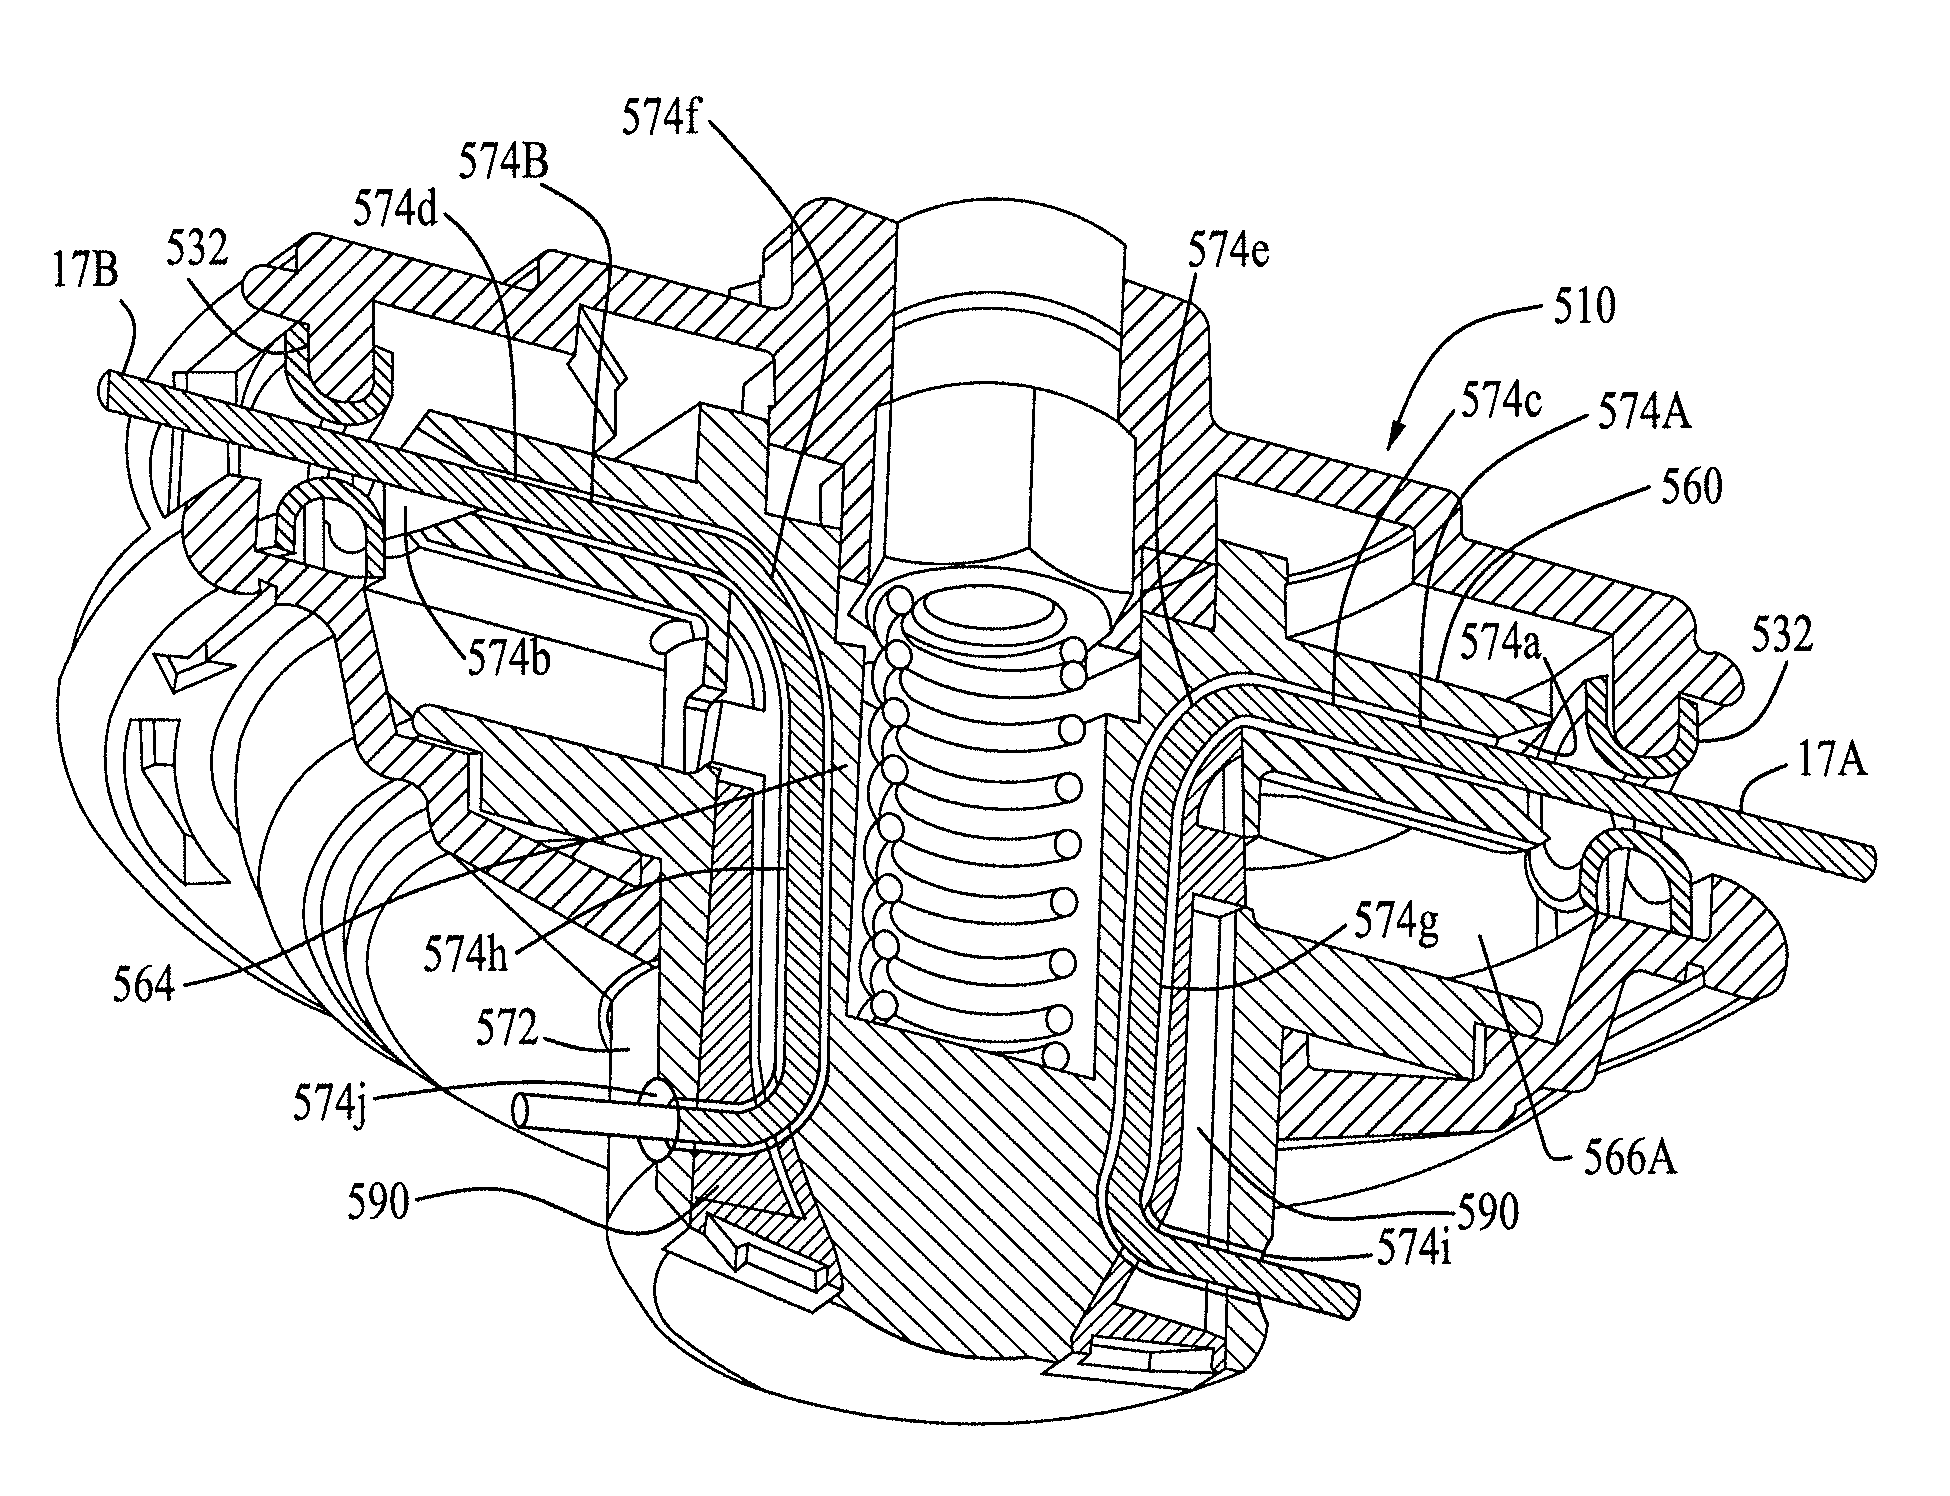 Trimmer head for use in flexible line rotary trimmers having improved line loading mechanism